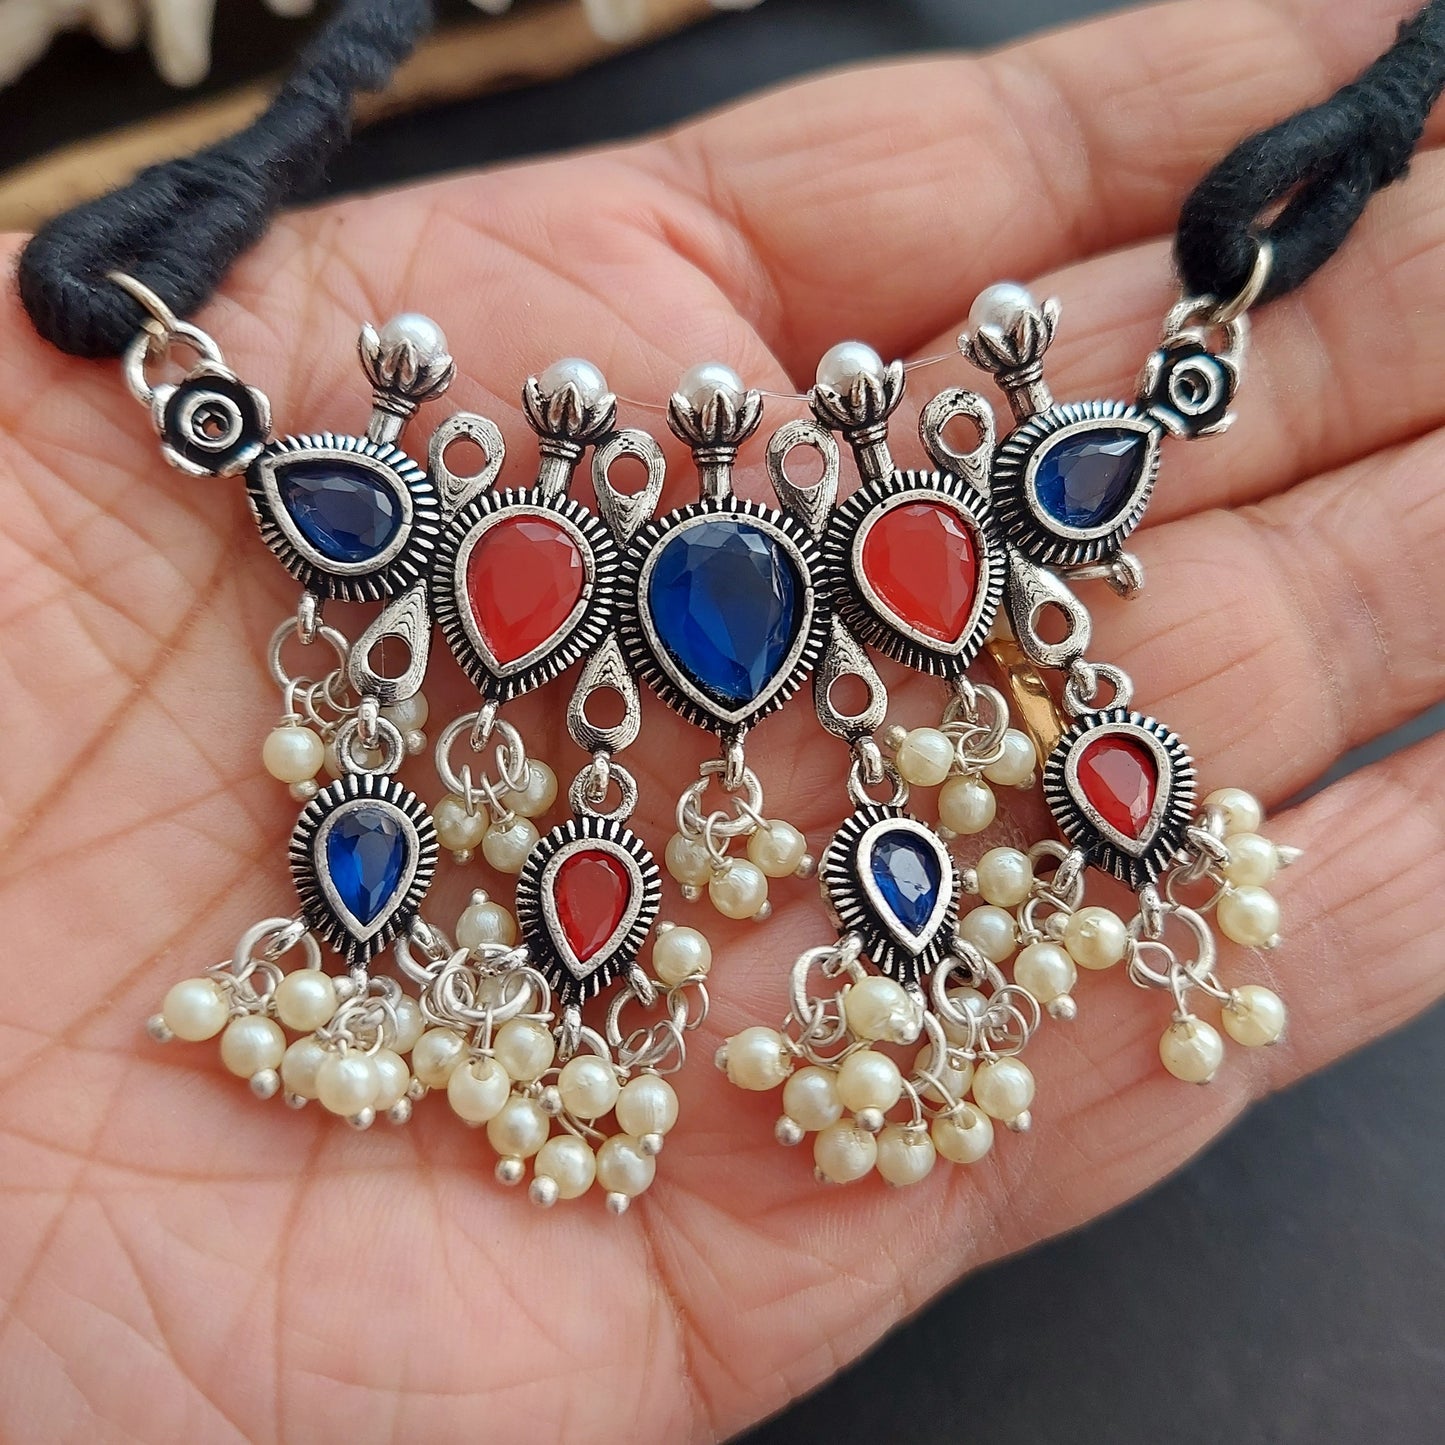 Silver Look alike Stone Studded Threaded Choker Set with Pearls Danglers - Red and Blue